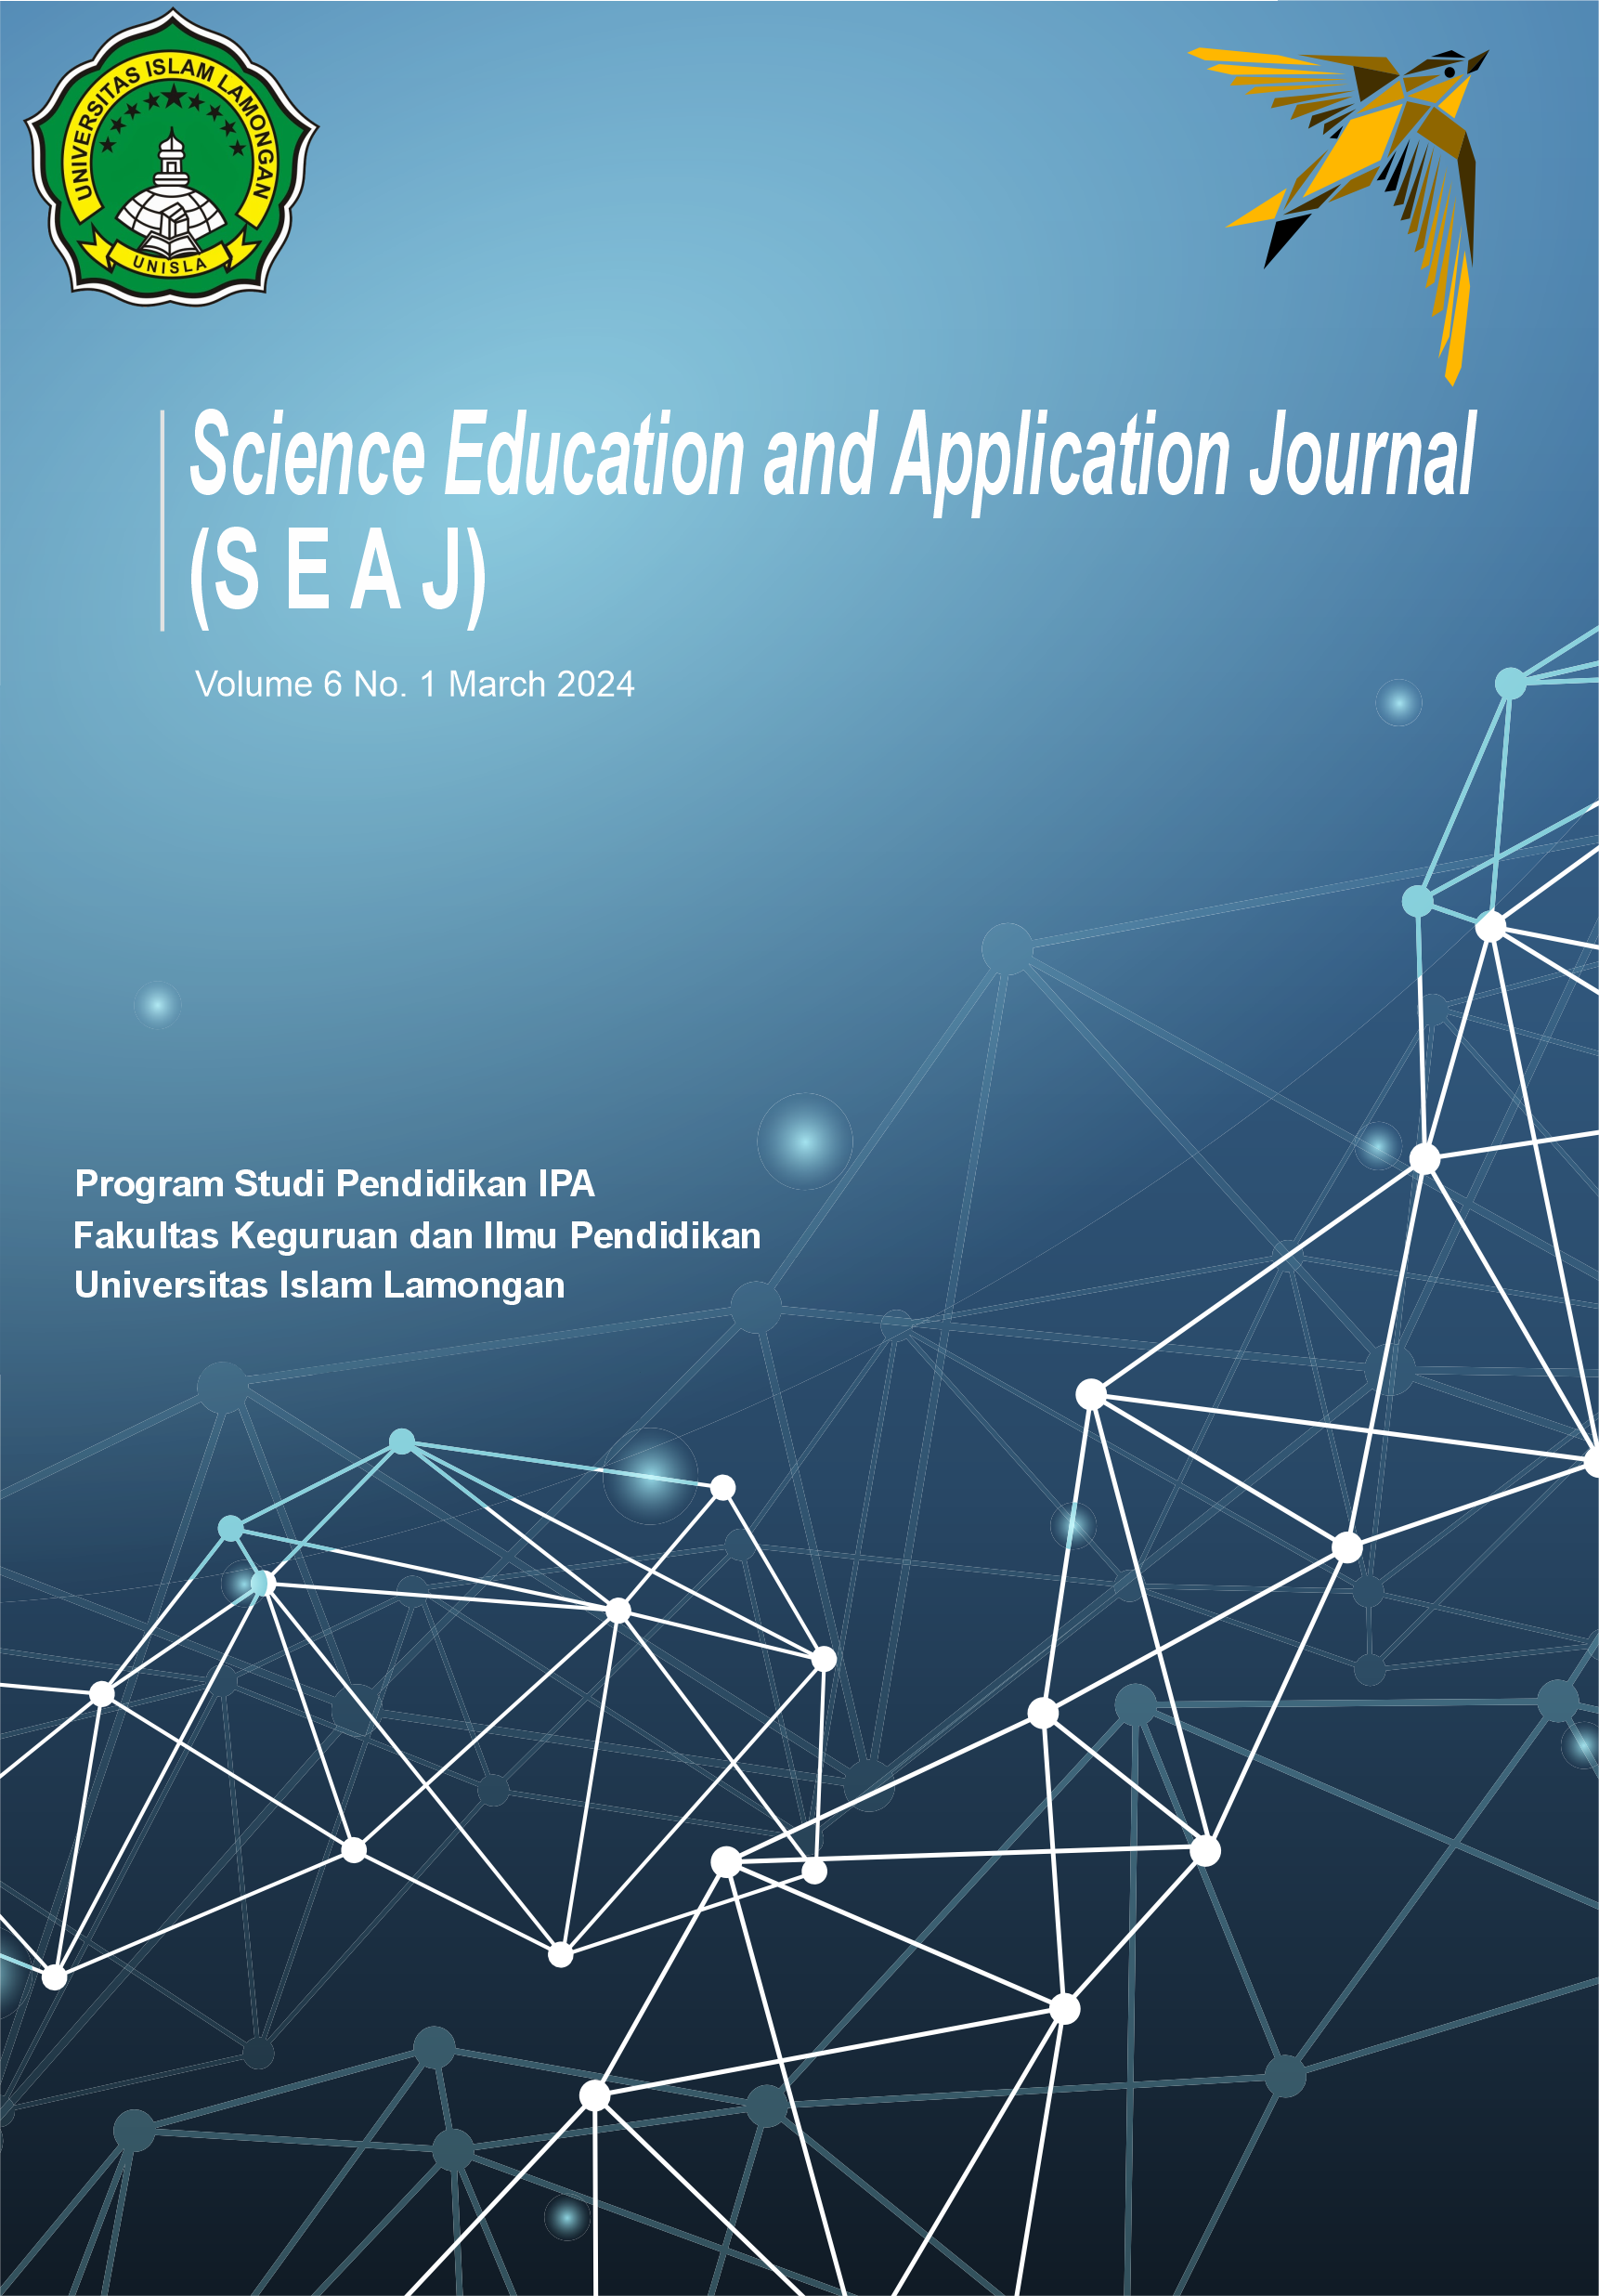 					View Vol. 6 No. 1 (2024): Science Education and Application Journal
				